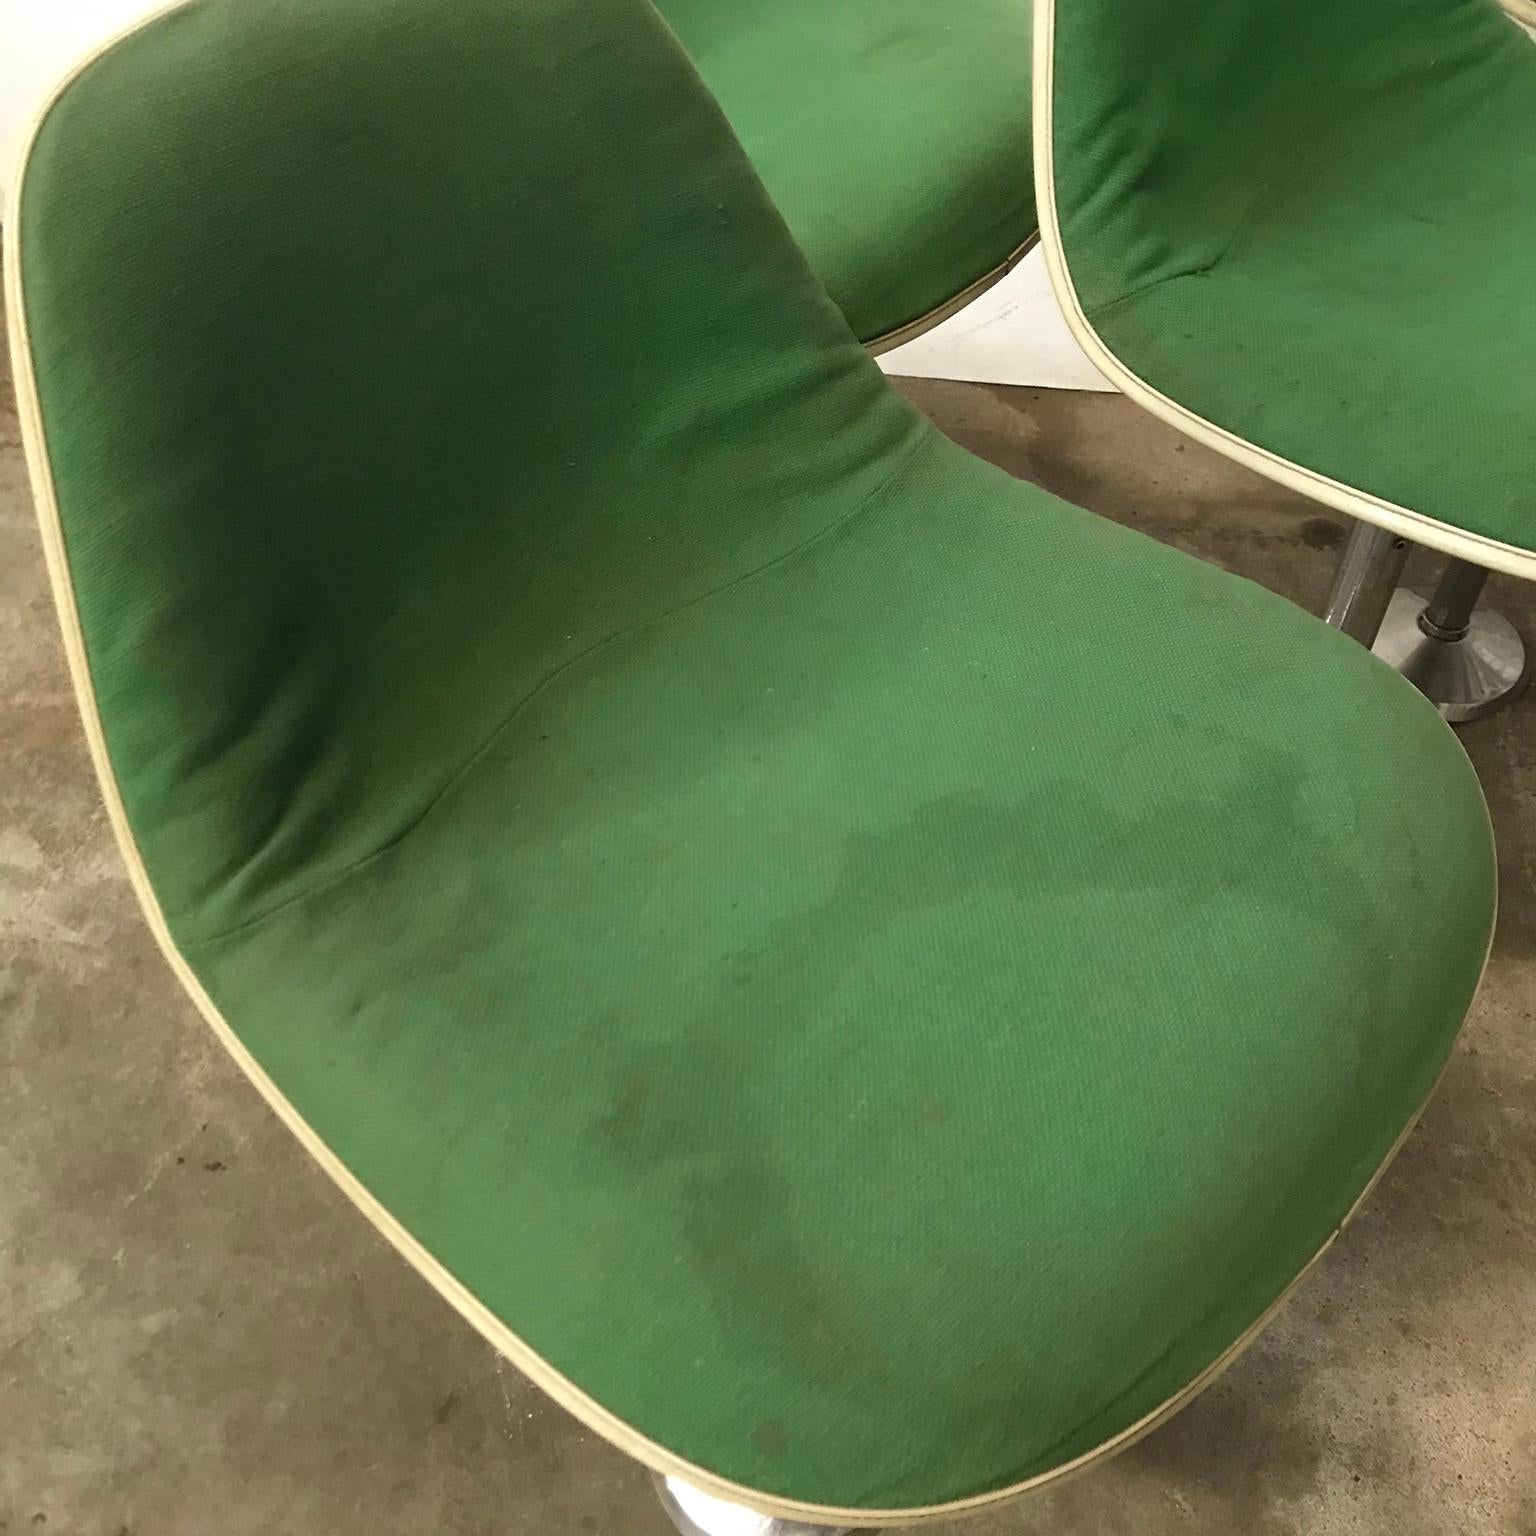 1969 Eames Herman Miller/Fehlbaum Extremely Rare White Barstools in Green Fabric For Sale 1